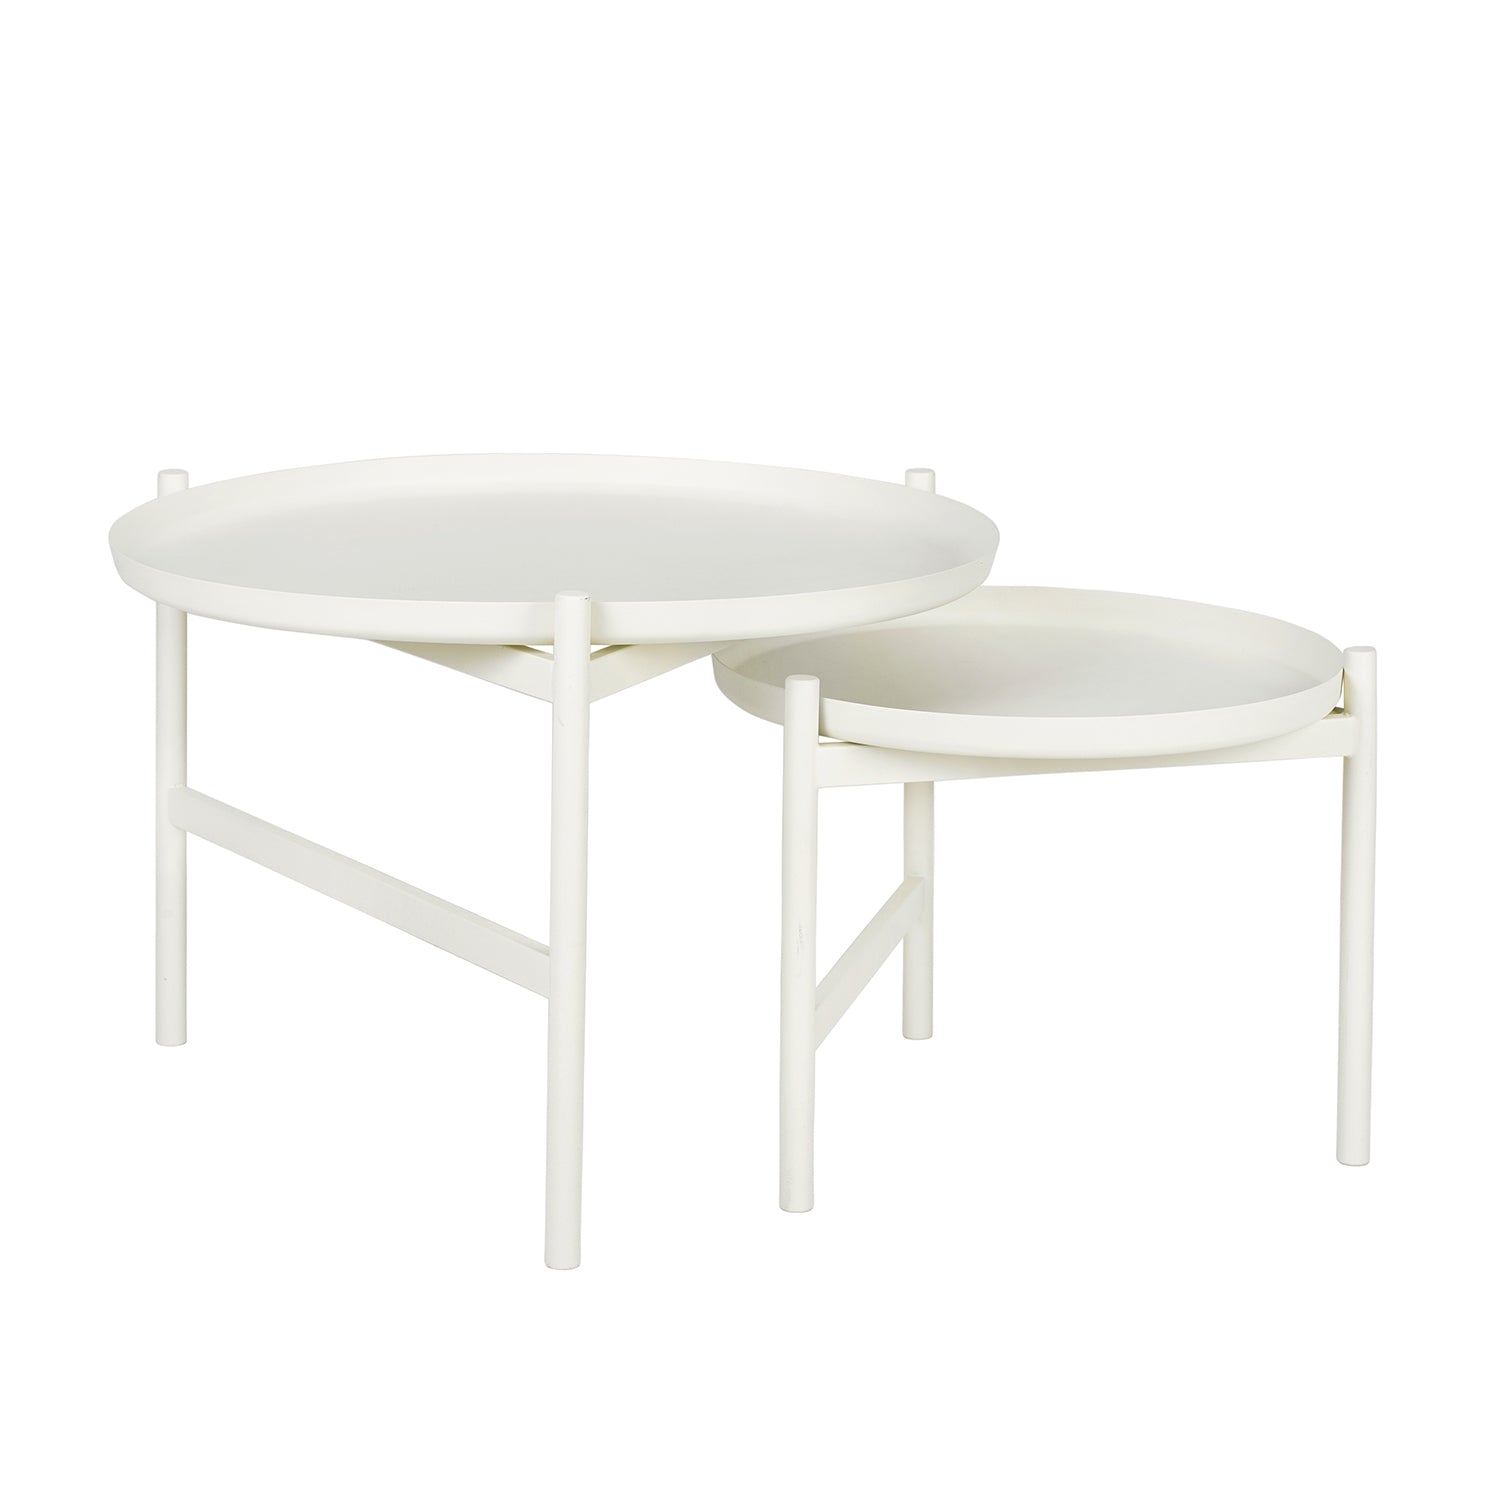 Turner Table - The Design Choice